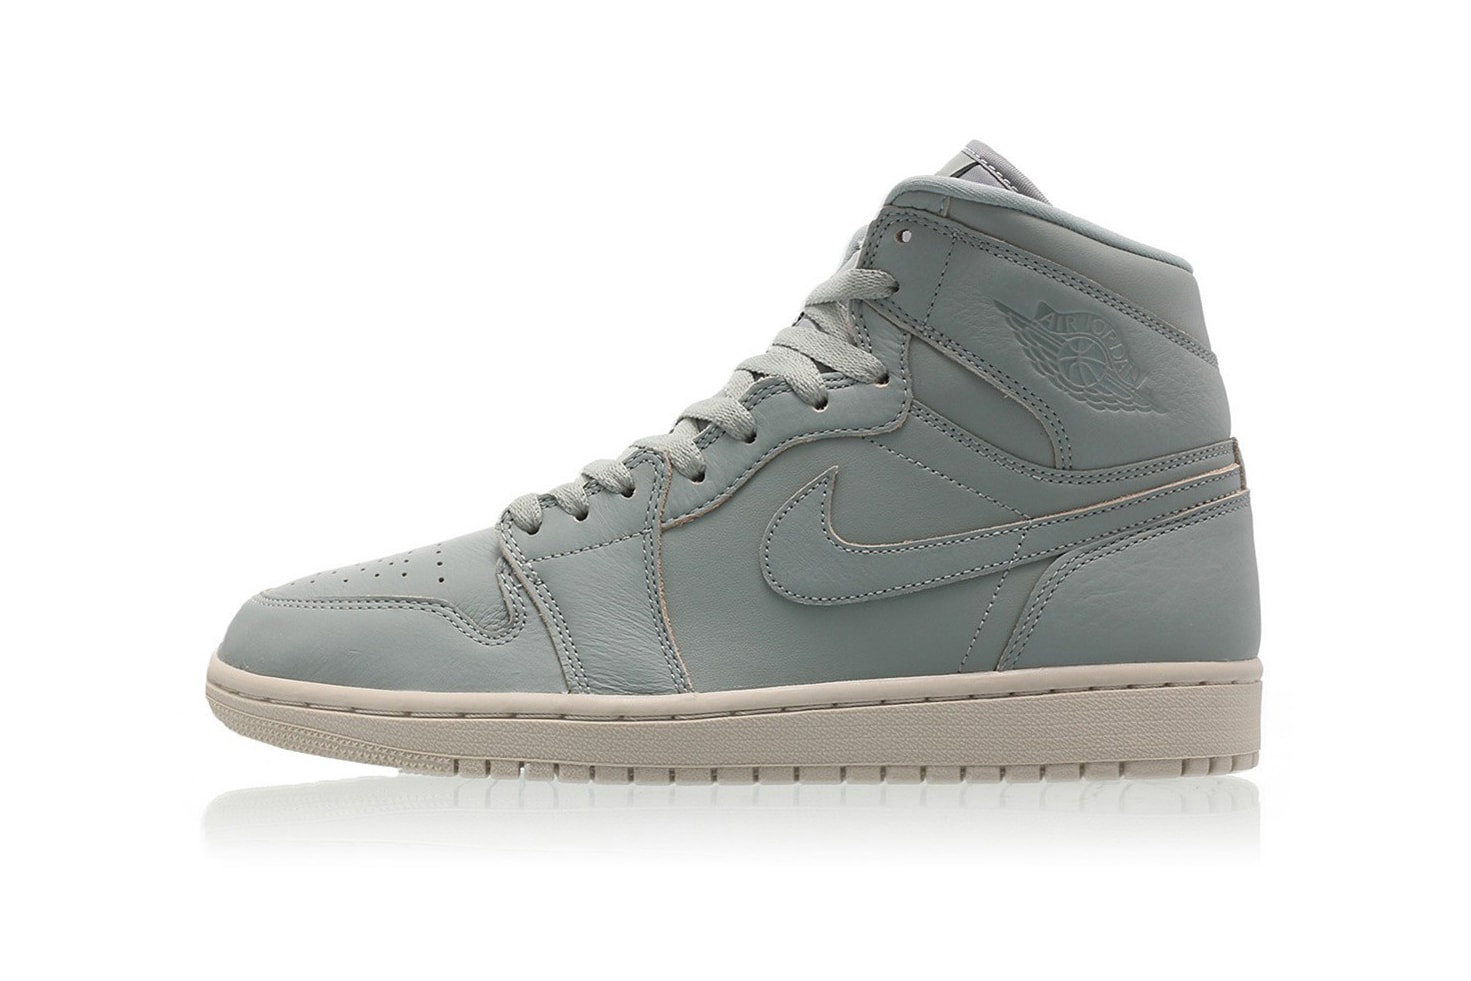 Air Jordan 1 Retro High Premium Mica Green march 2018 spring summer release date info drop sneakers shoes footwear titolo